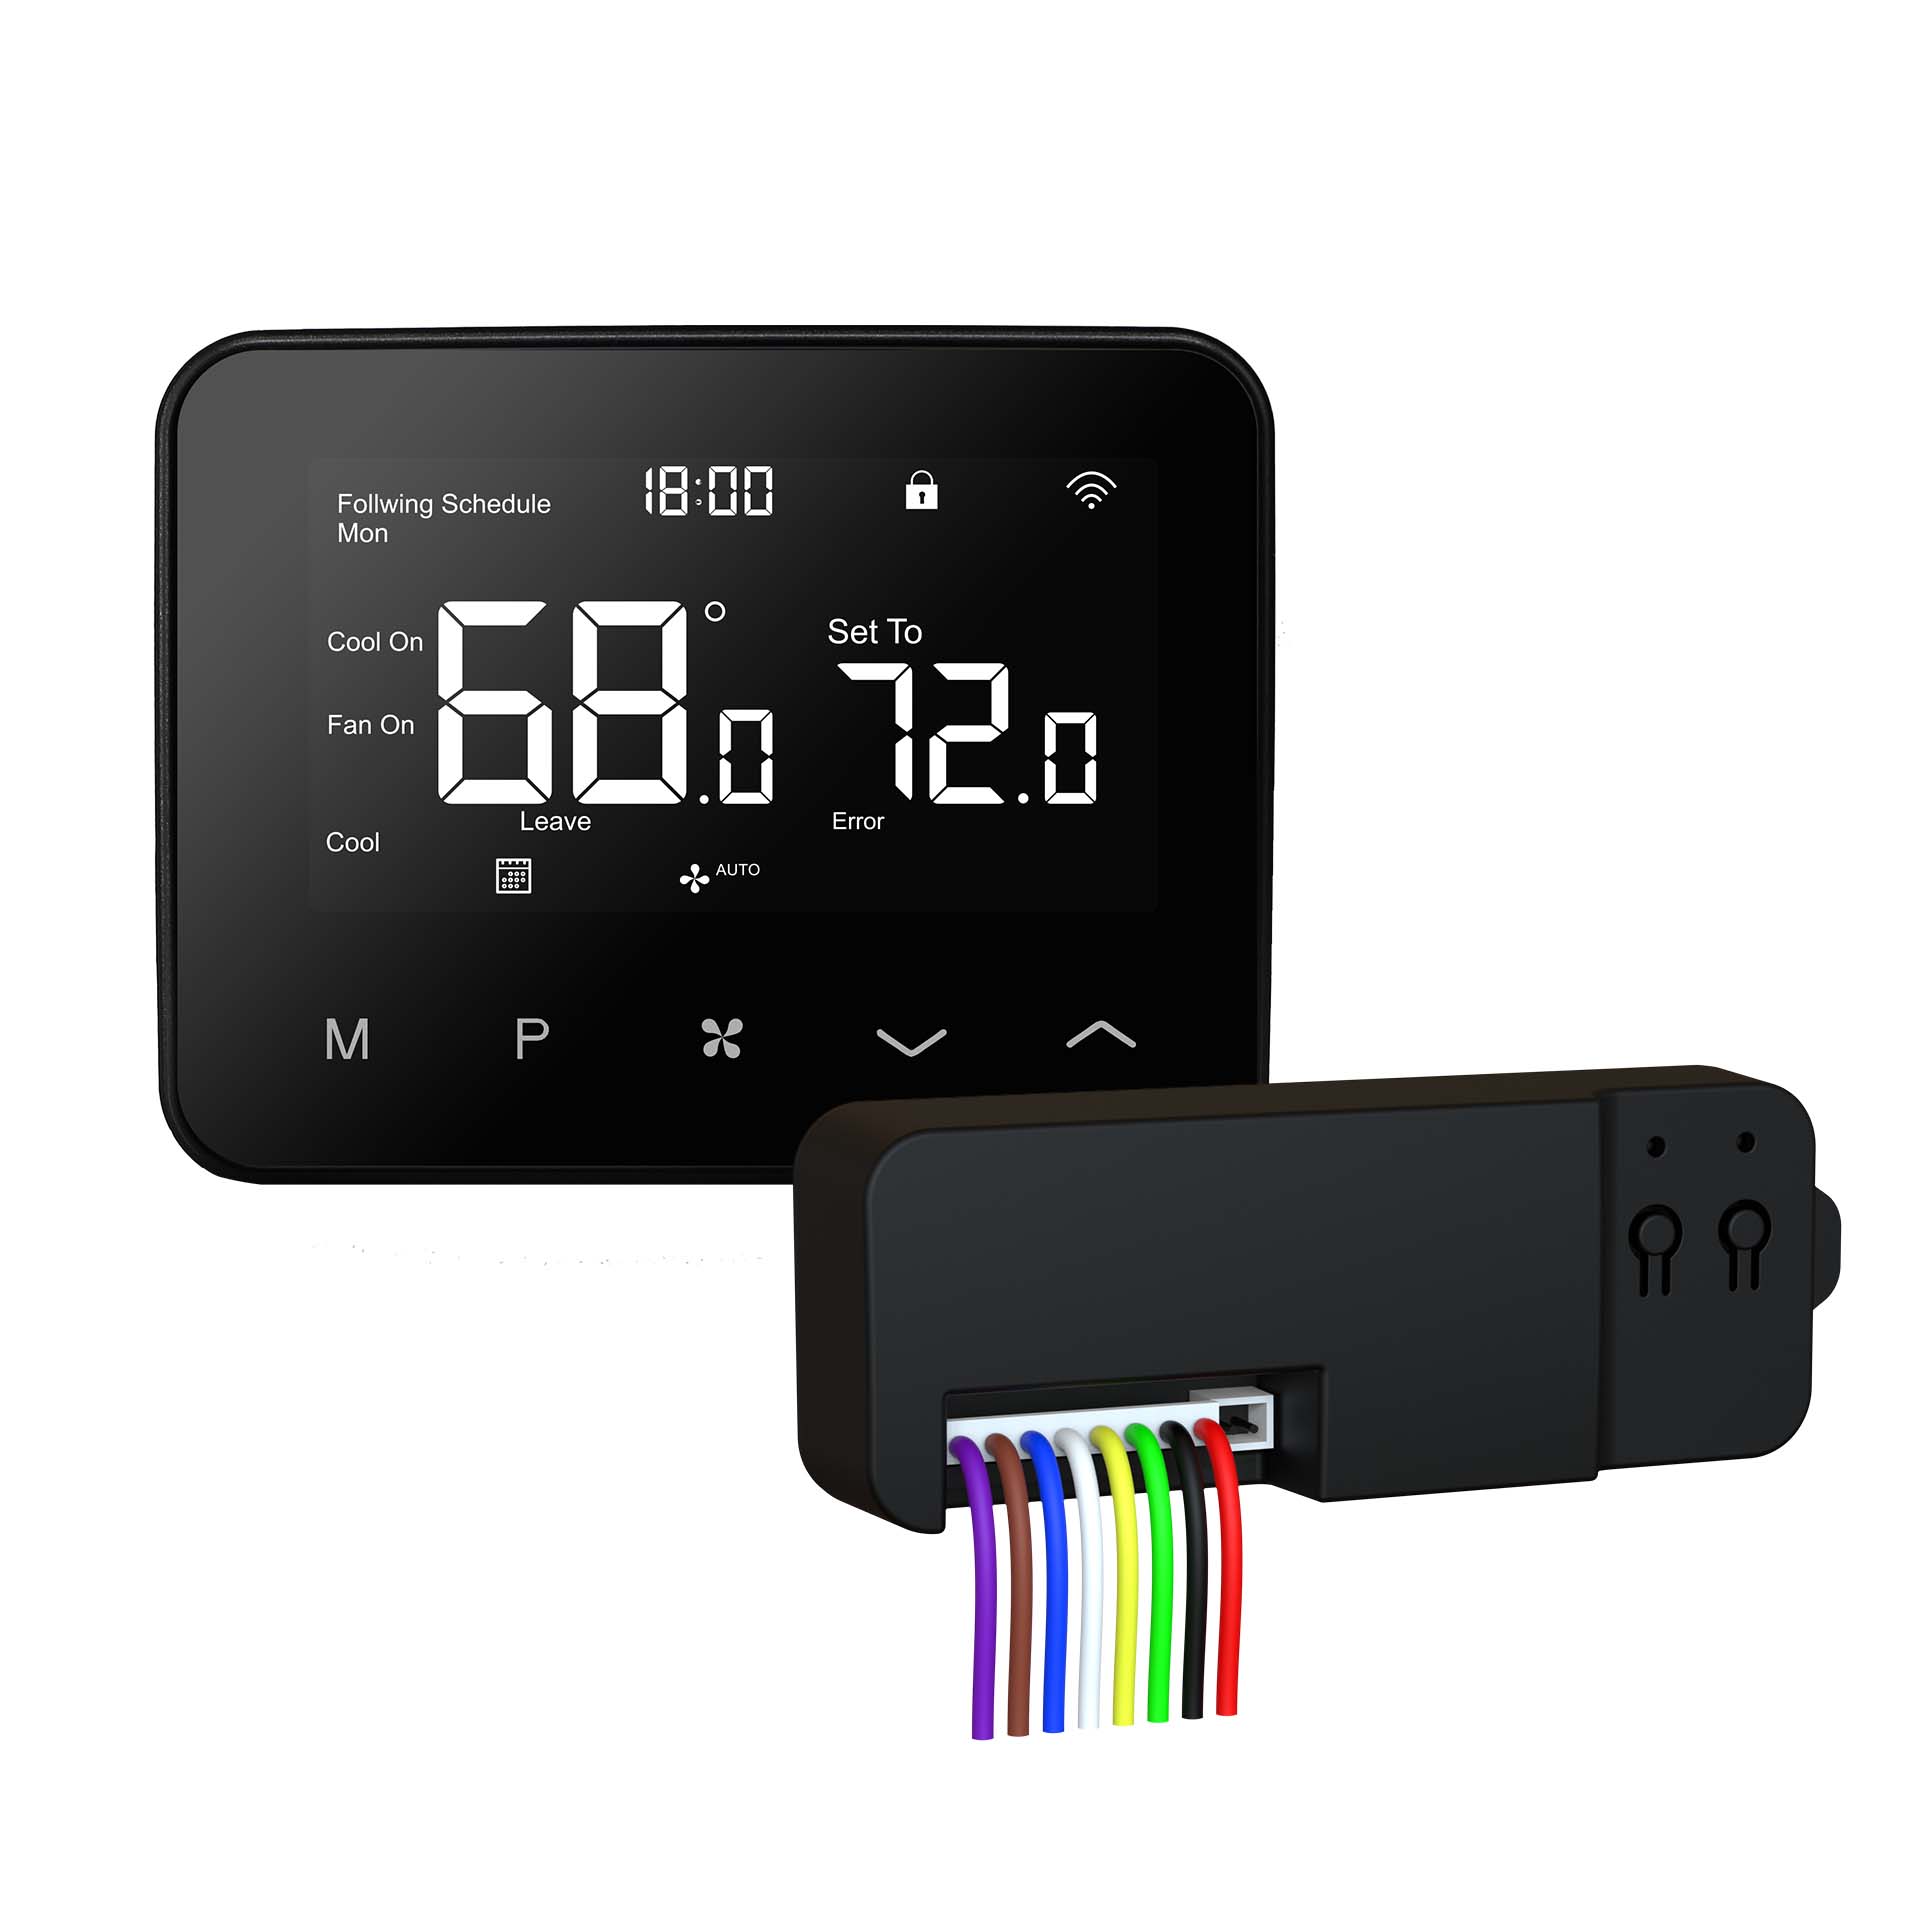 Digital WiFi PTAC Thermostat for Heat Pump Heat and Cool Control